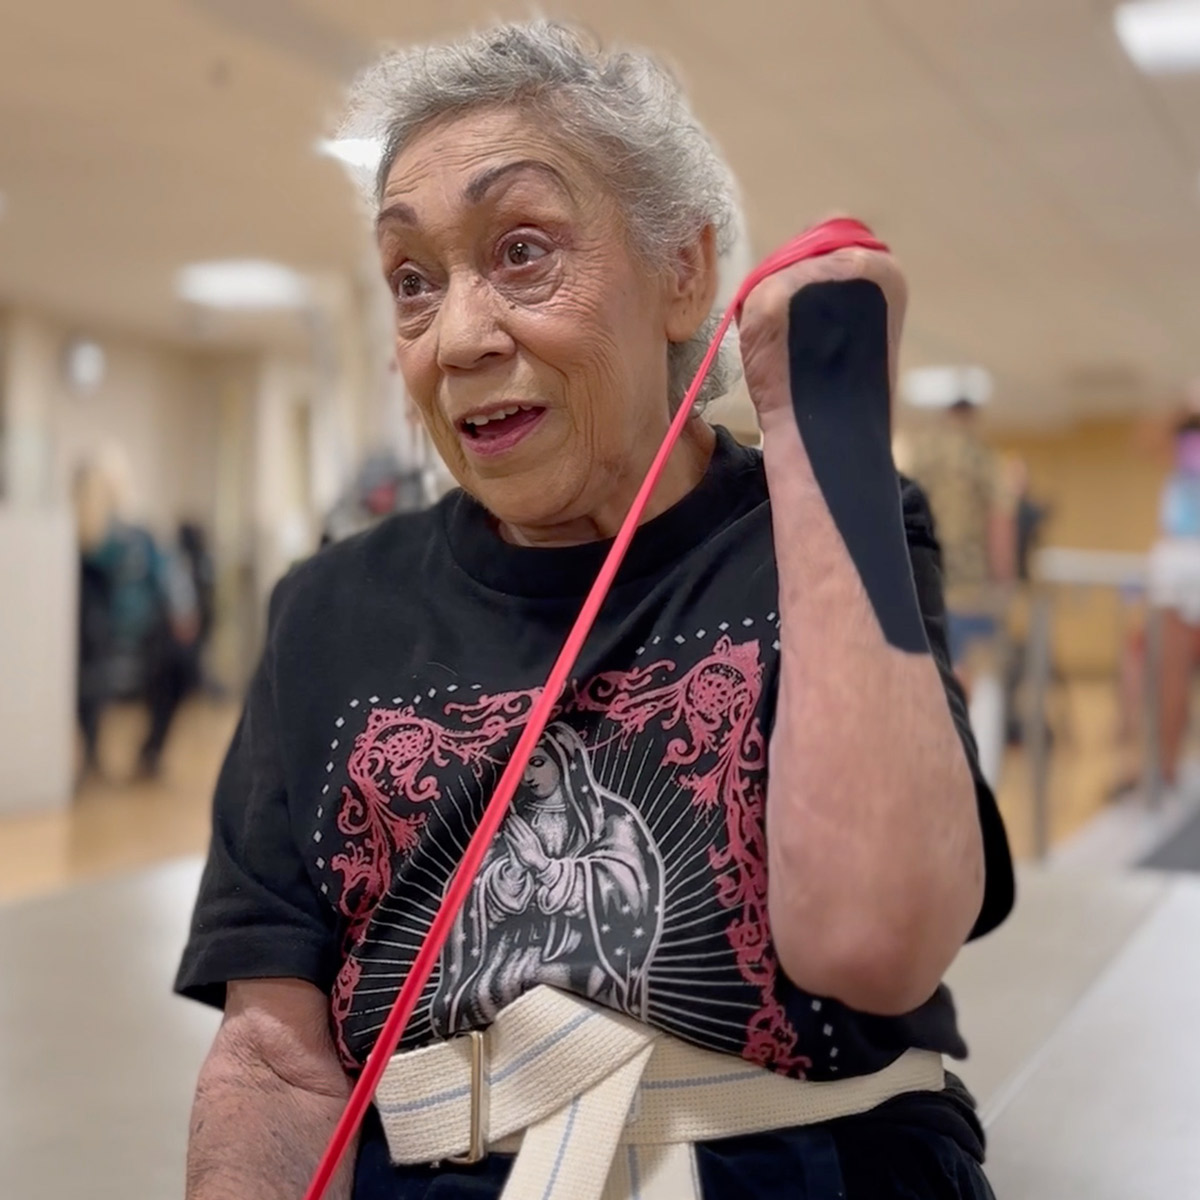 An older Latina woman uses a band to stretch her arms